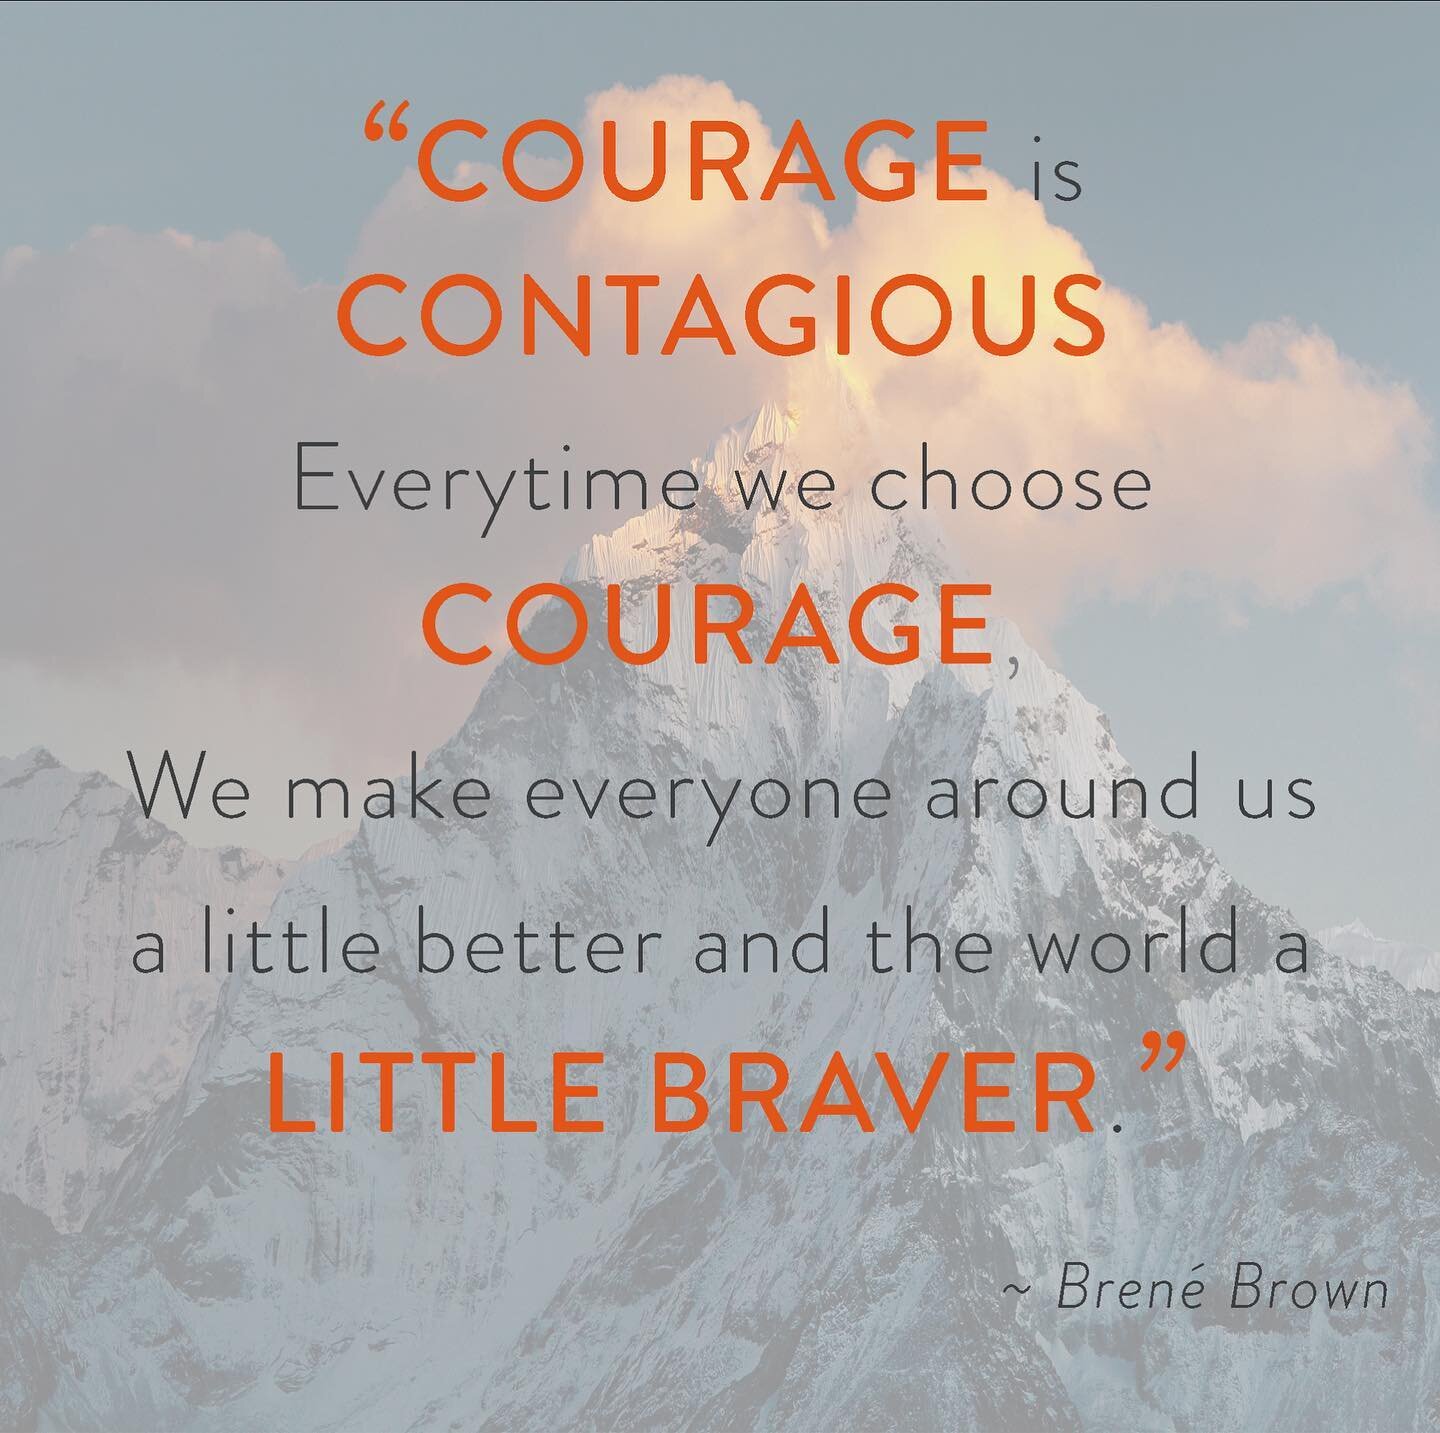 Courage is contagious. So says Bren&eacute;, and we do too. We&rsquo;re tuning in to hear more of what she has to say on #courage during these times tomorrow night on CBS 60 Minutes. And we&rsquo;re tuning our own practices for leaders who want to de